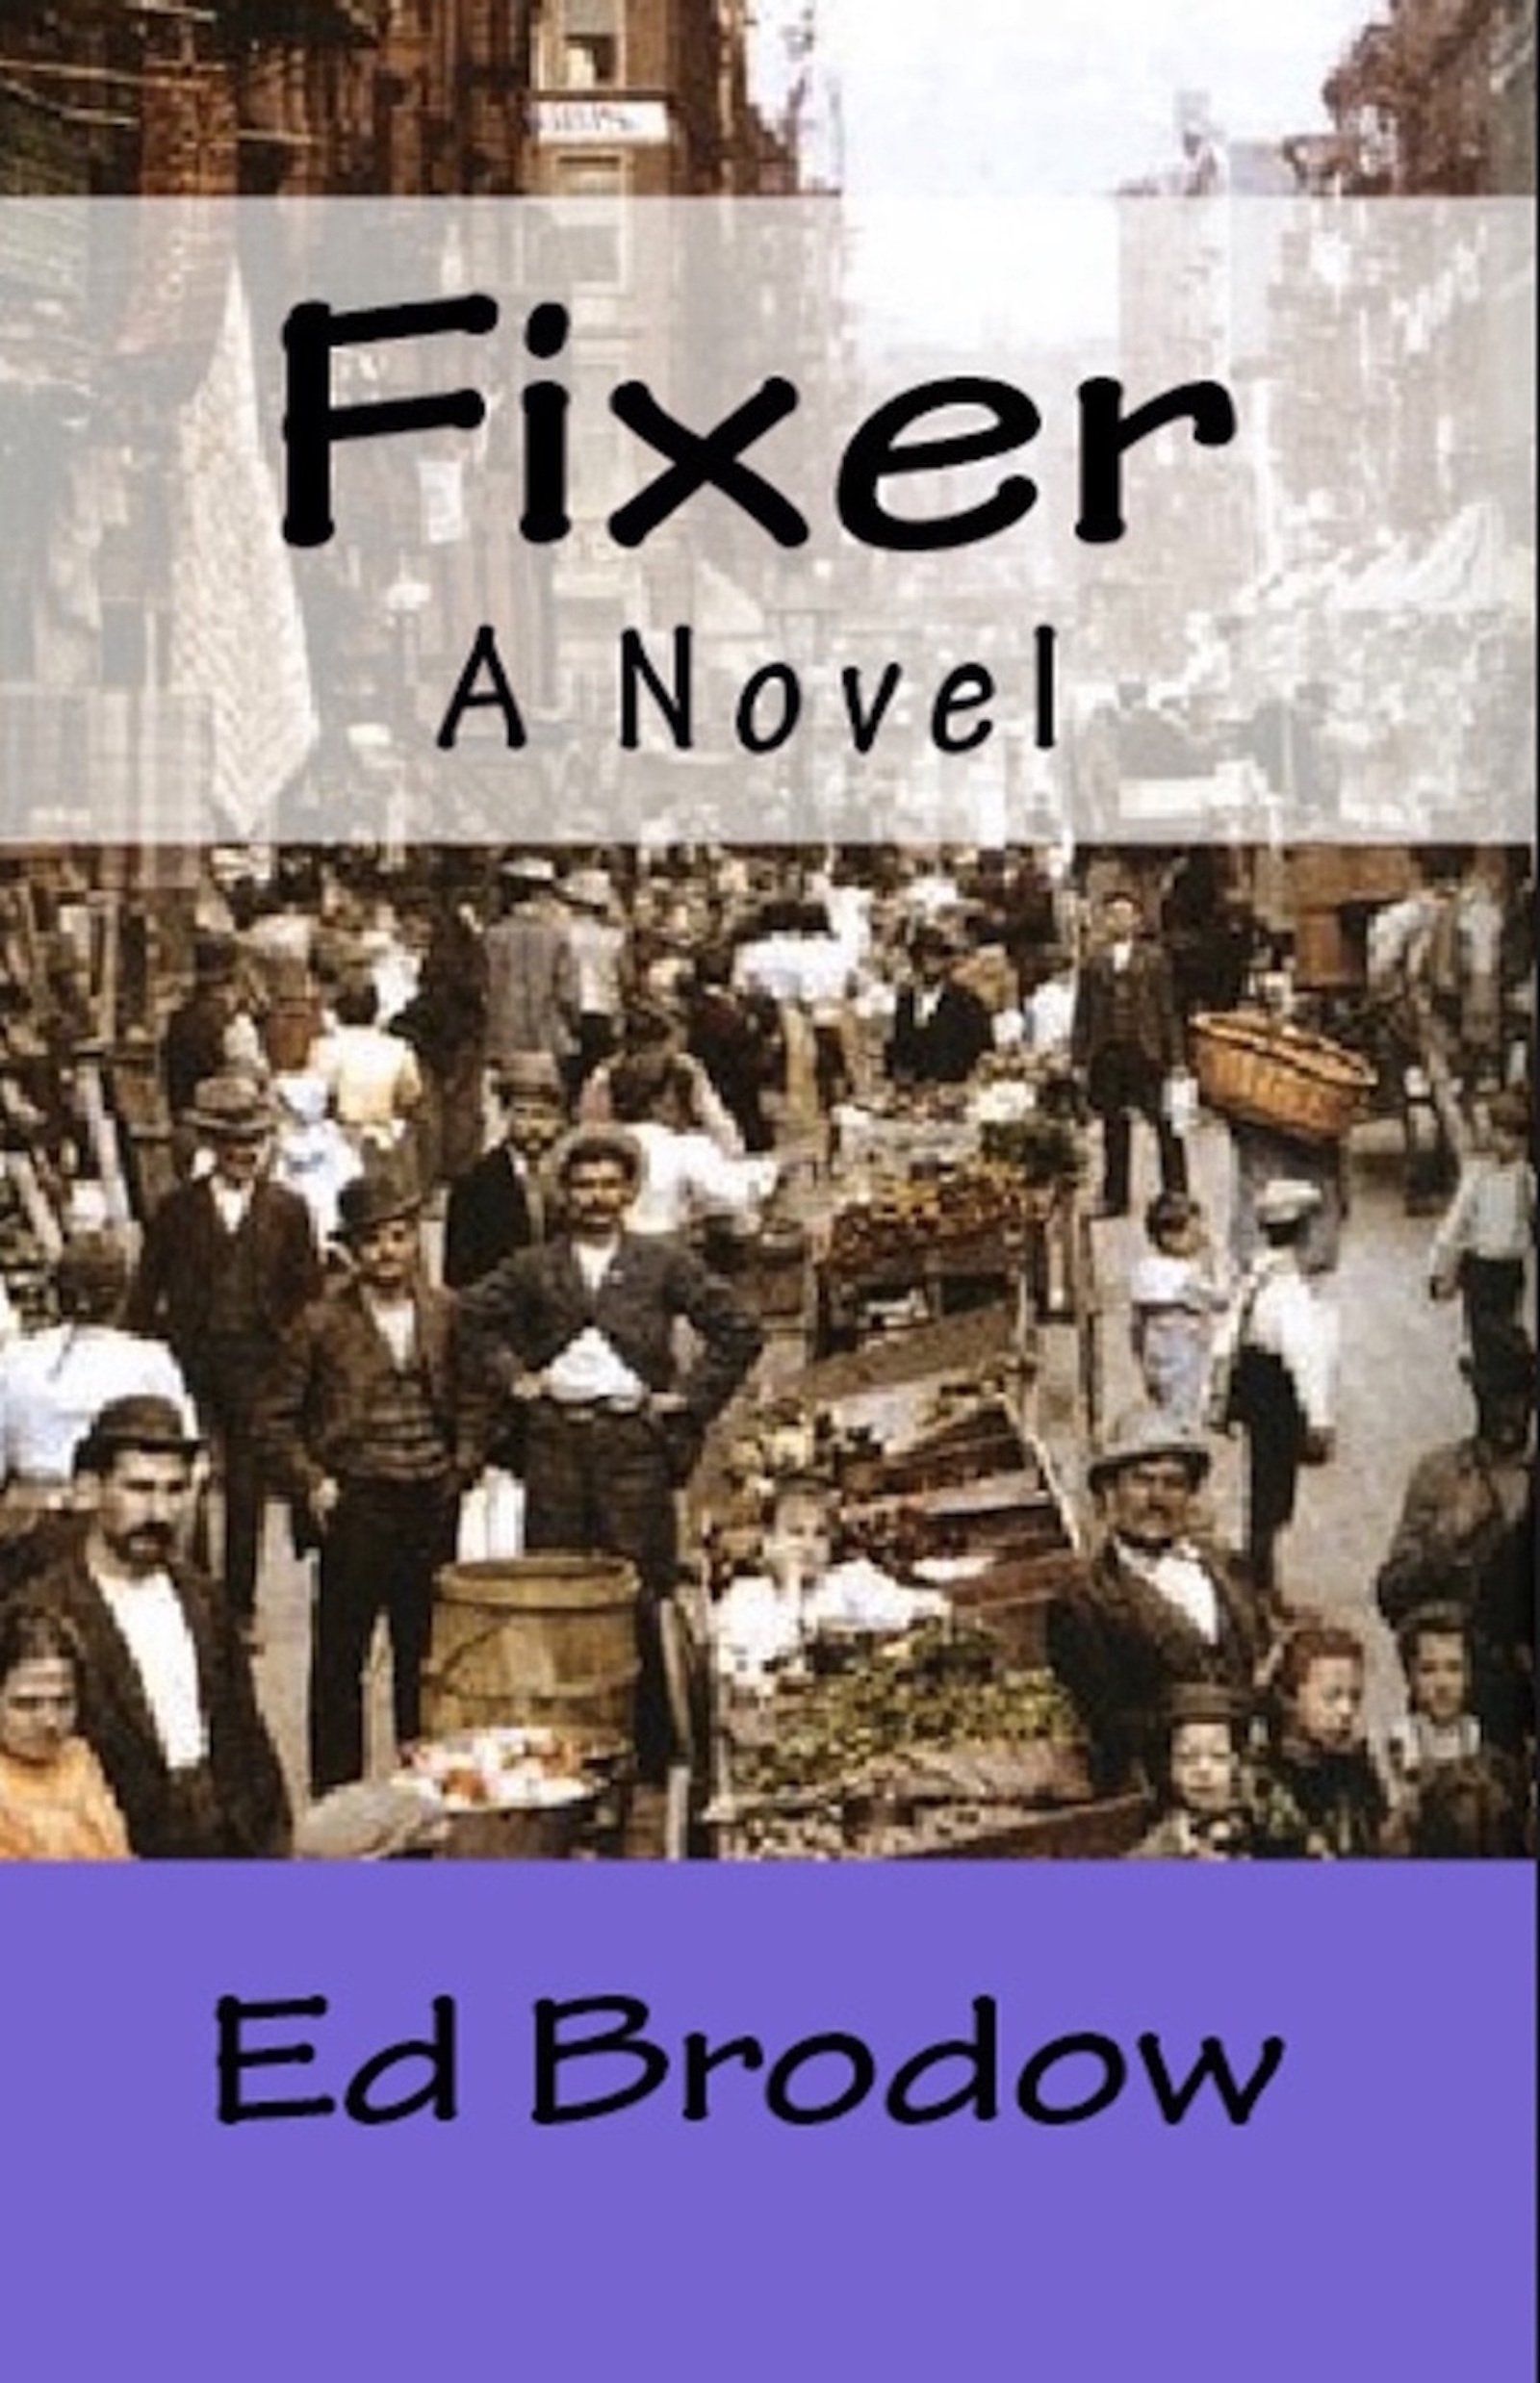 Fixer A Novel by Ed Brodow